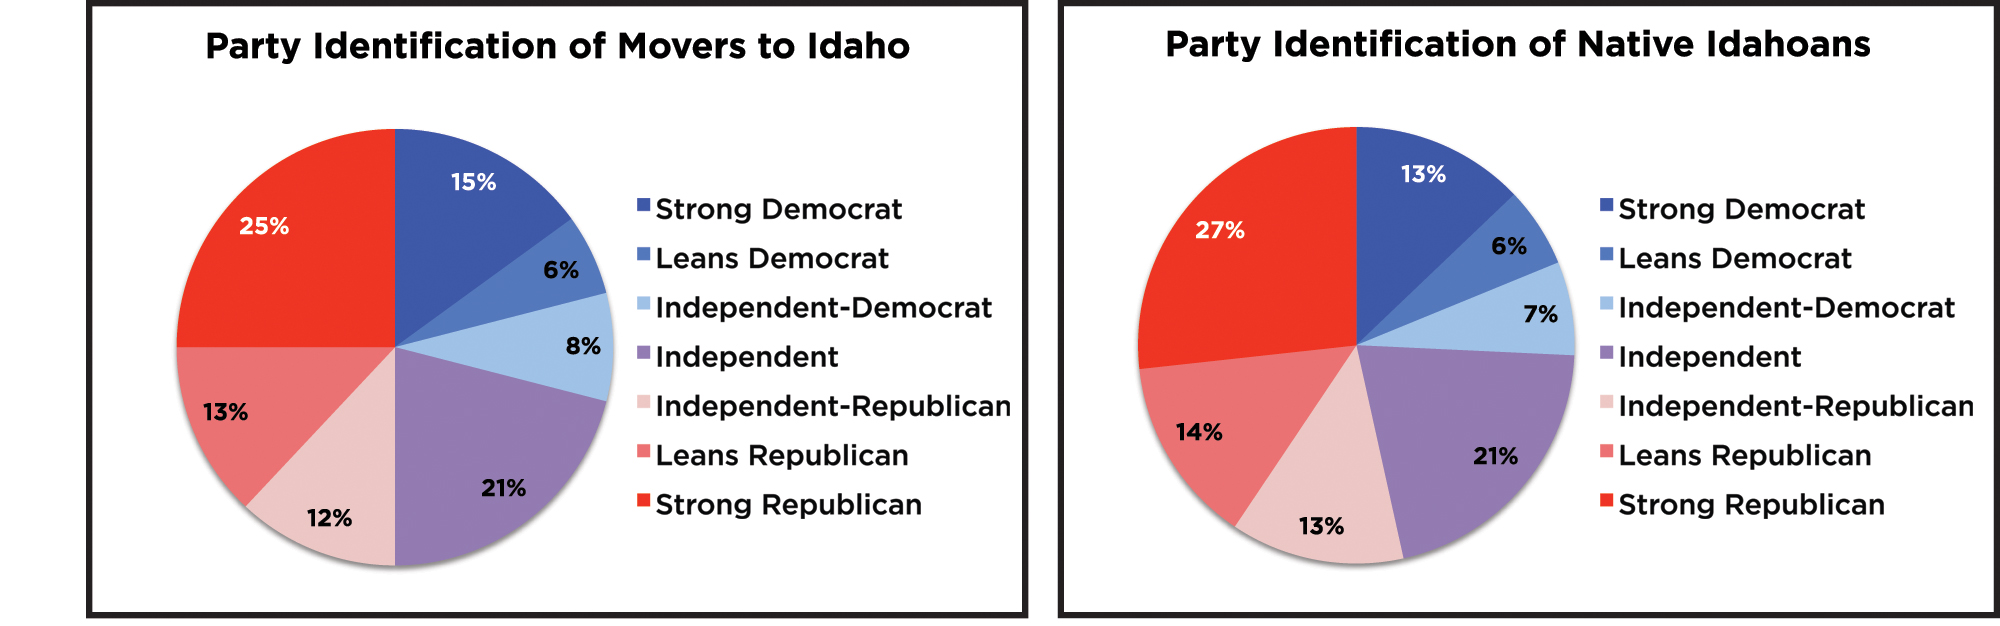 Party identification by movers vs native Idahoans, pie charts